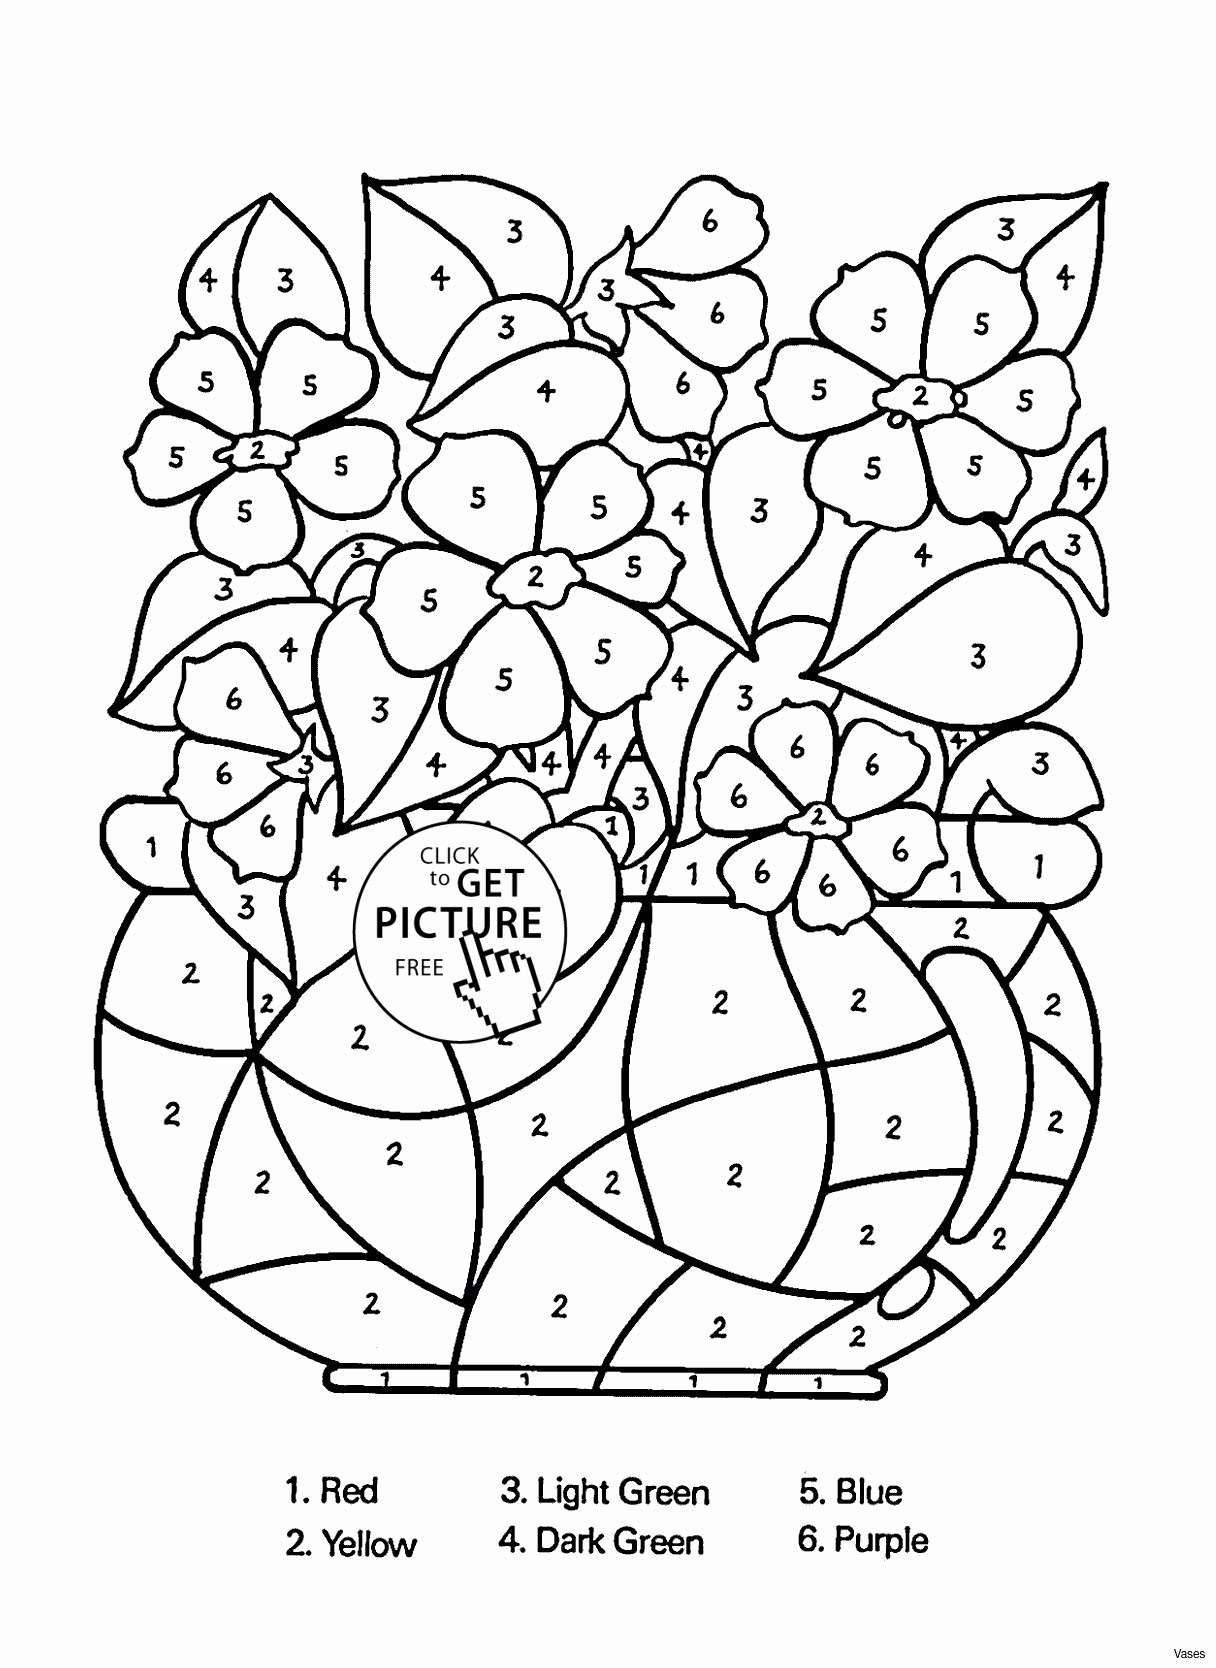 30 Unique Dried Twigs for Vases 2024 free download dried twigs for vases of white glass vase elegant vases flower vase coloring page pages within white glass vase elegant vases flower vase coloring page pages flowers in a top i 0d